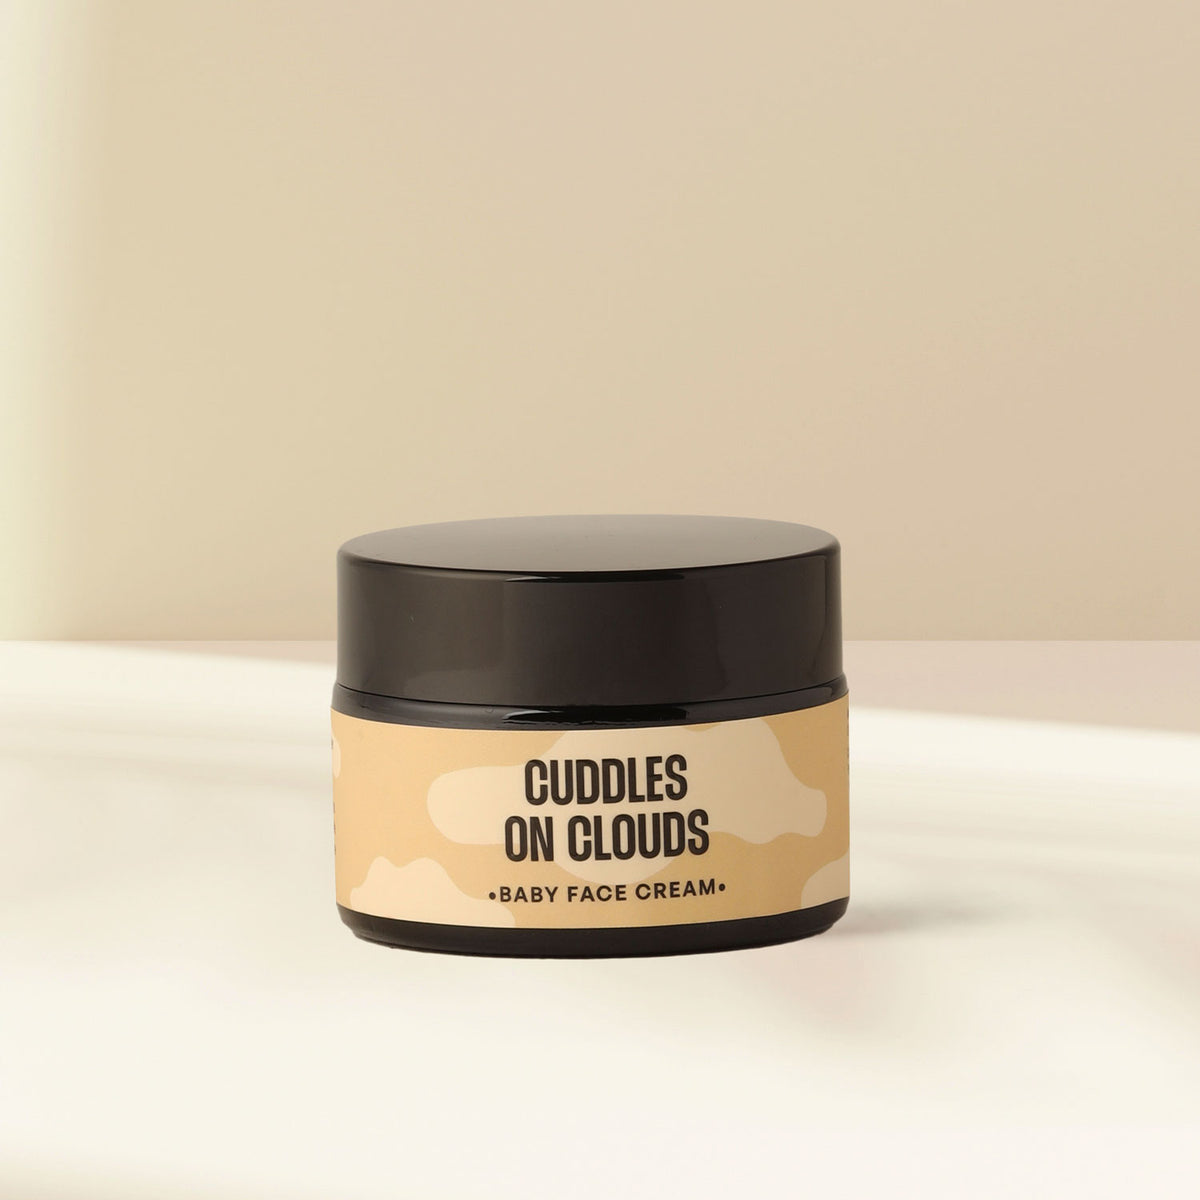 Cuddles on Clouds | Baby Face Cream